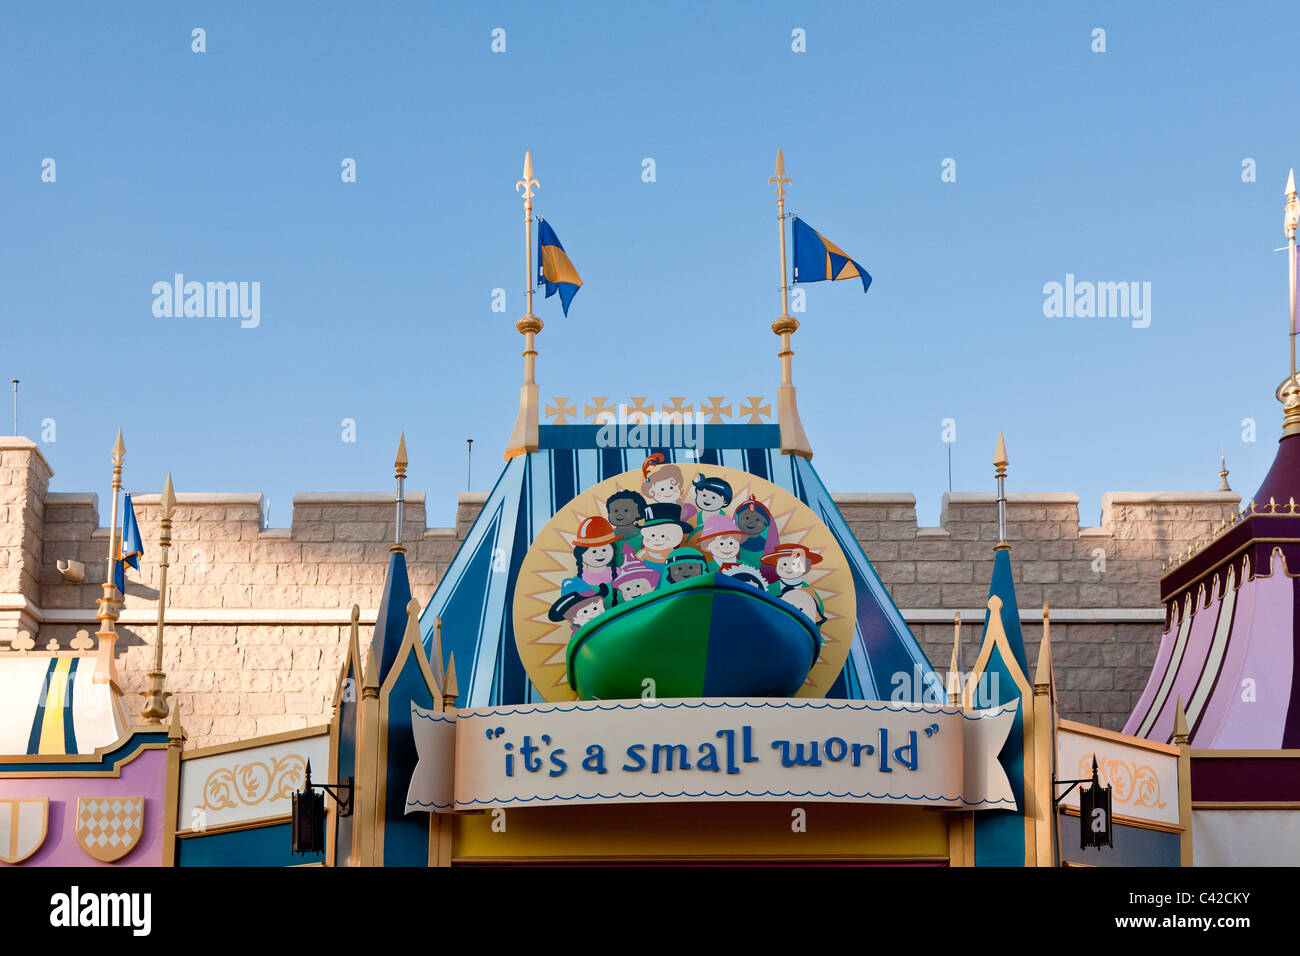 Entrance to 'It's a Small World' attraction ride in Fantasyland at the Magic Kingdom in Disney World, Kissimmee, Florida Stock Photo